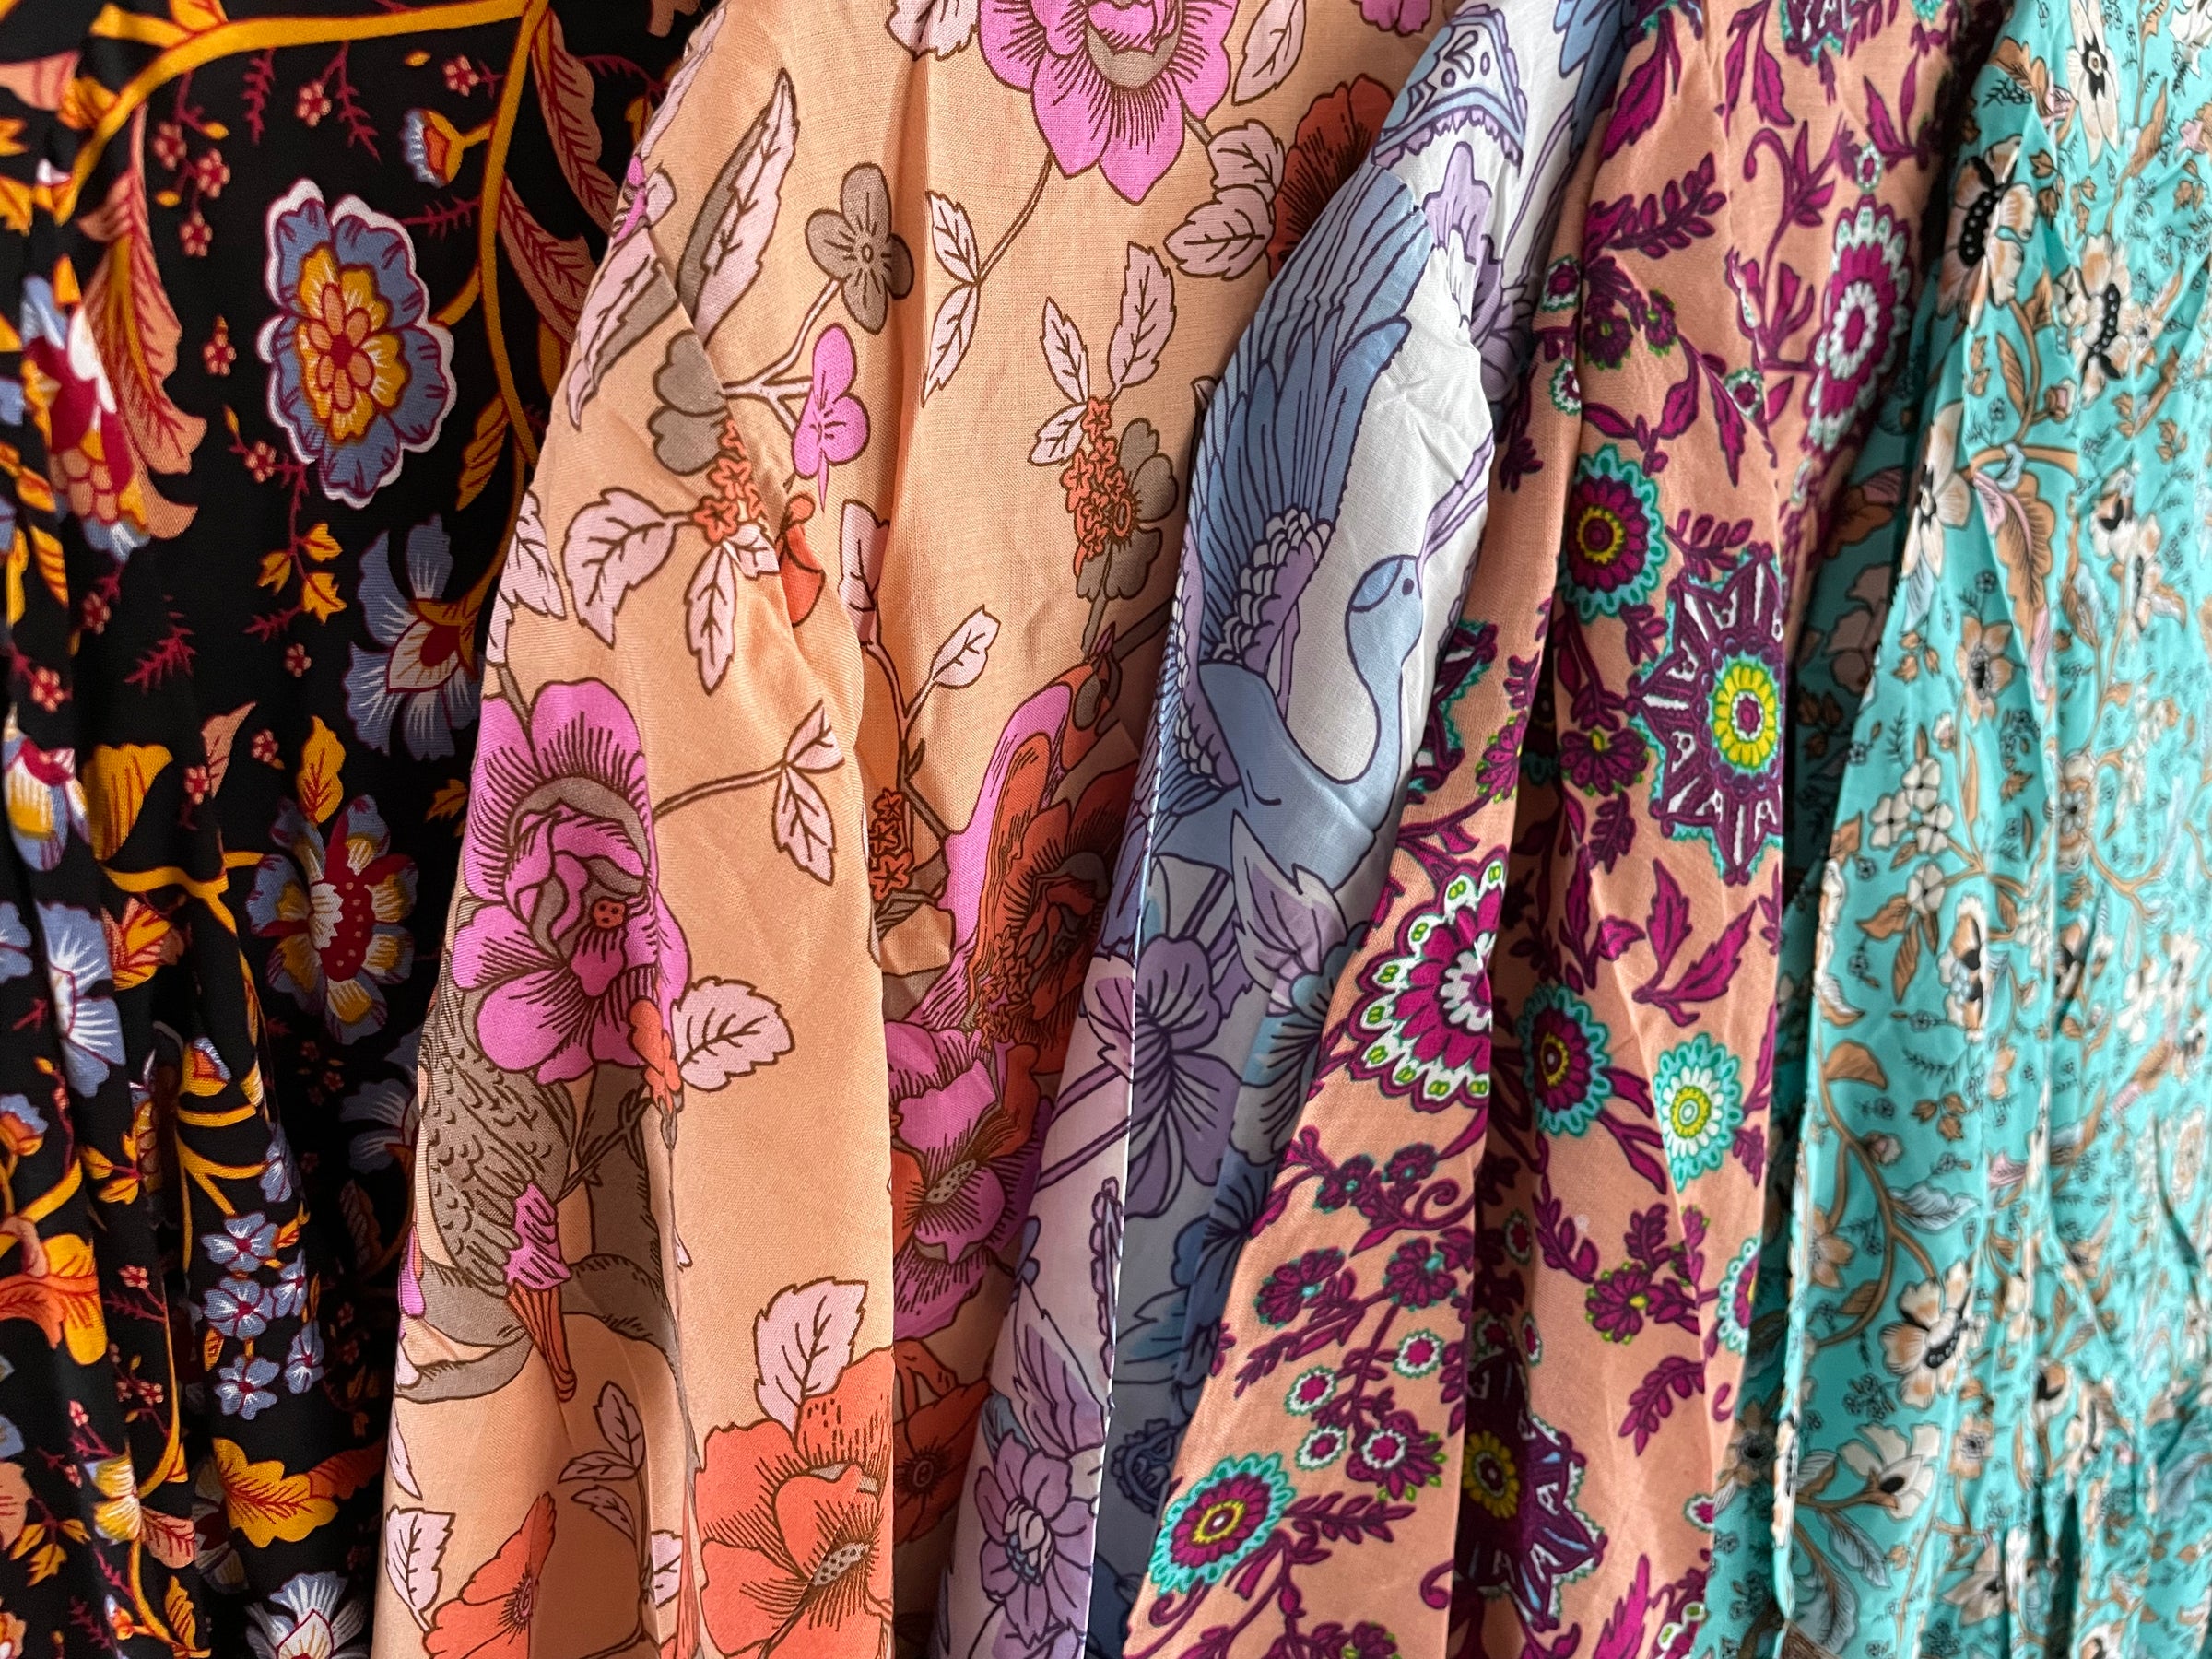 A close view of clothing on hangers, showing a variety of colourful-patterned fabrics